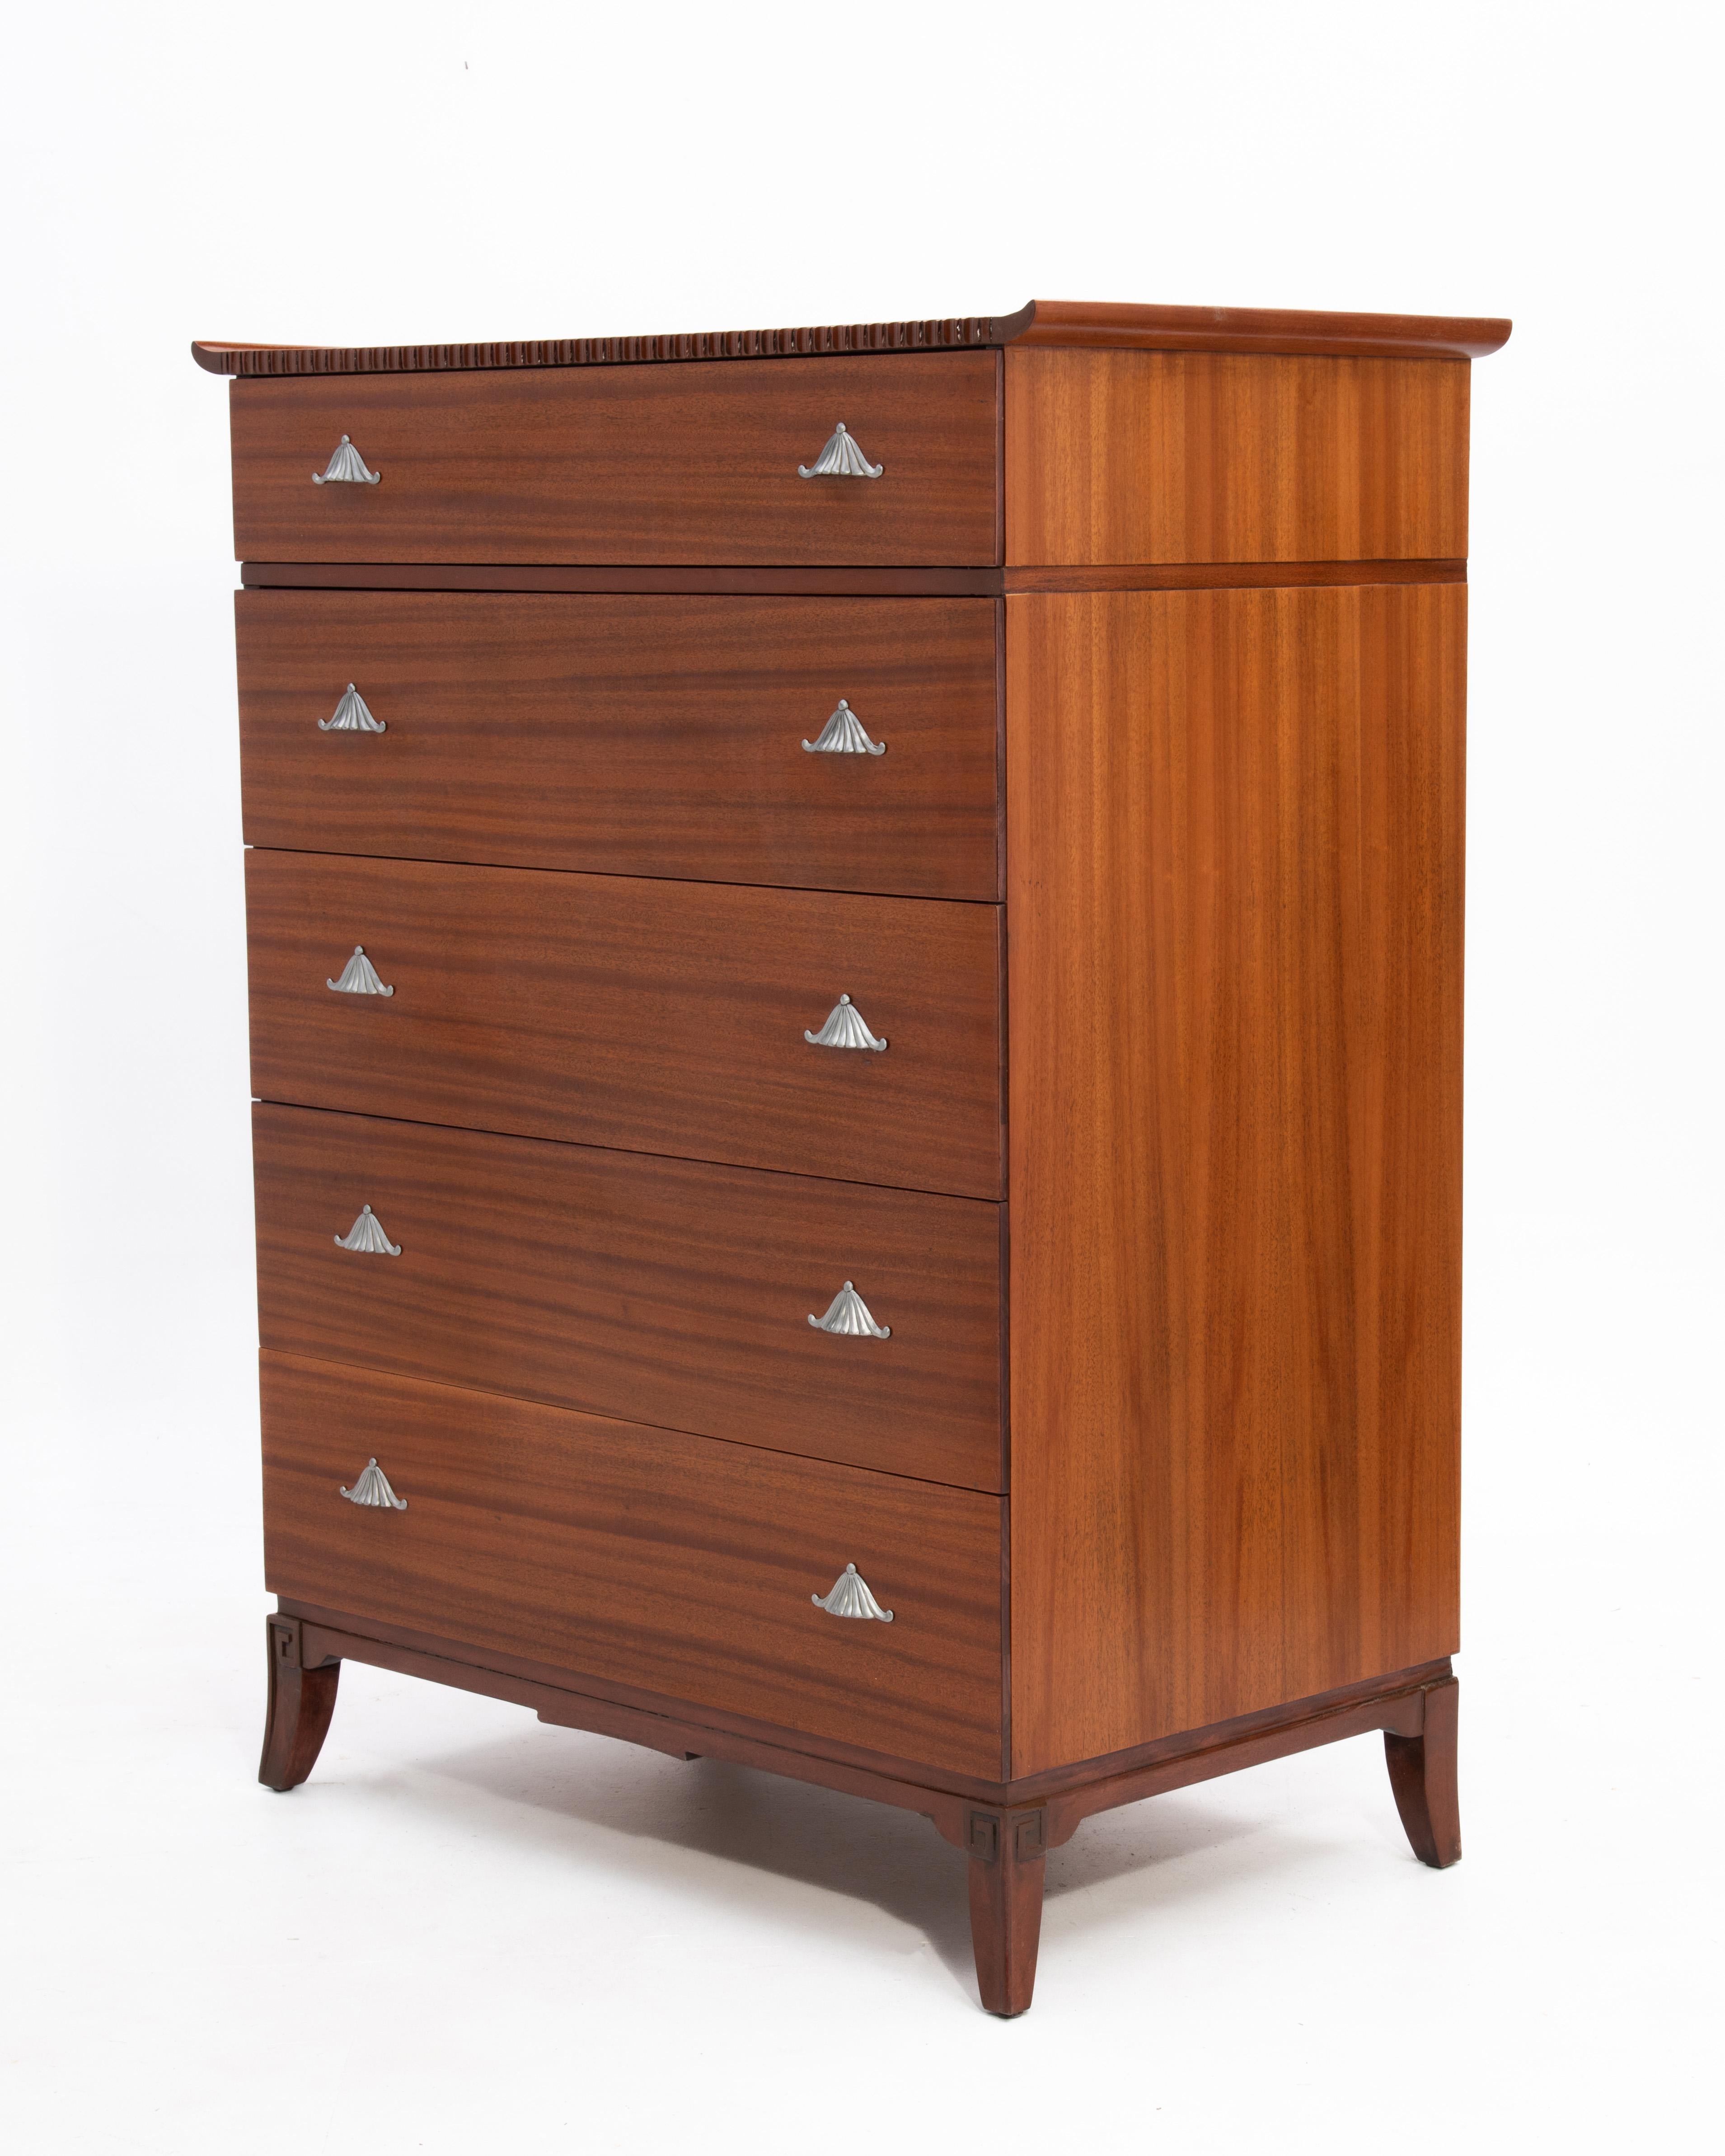 RWAY Mid Century James Mont Chinoiserie Pagoda Mahogany Highboy Dresser In Good Condition For Sale In Forest Grove, PA